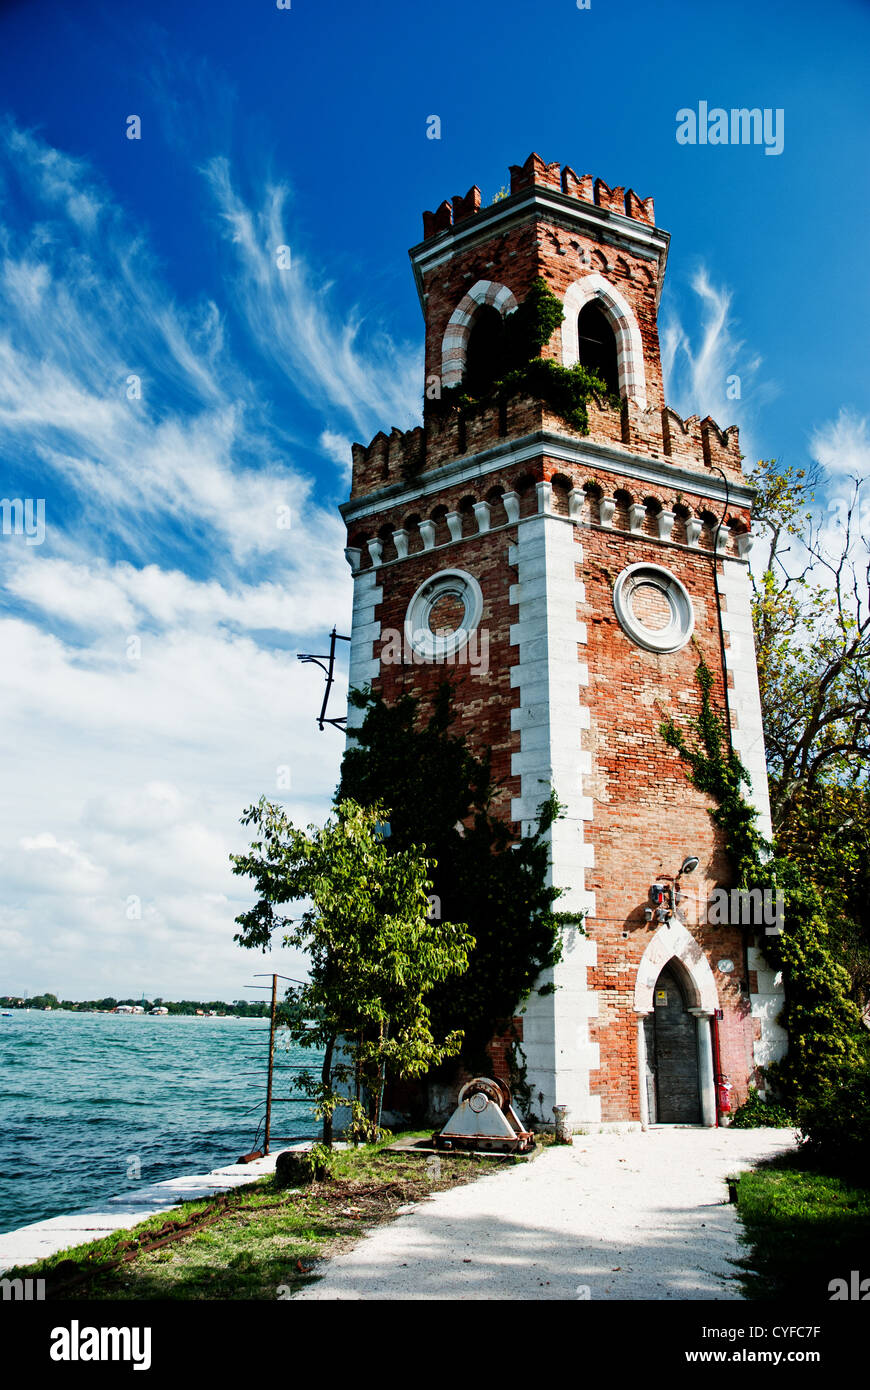 Old shipyard tower at Arsenale, Venice, italy Stock Photo